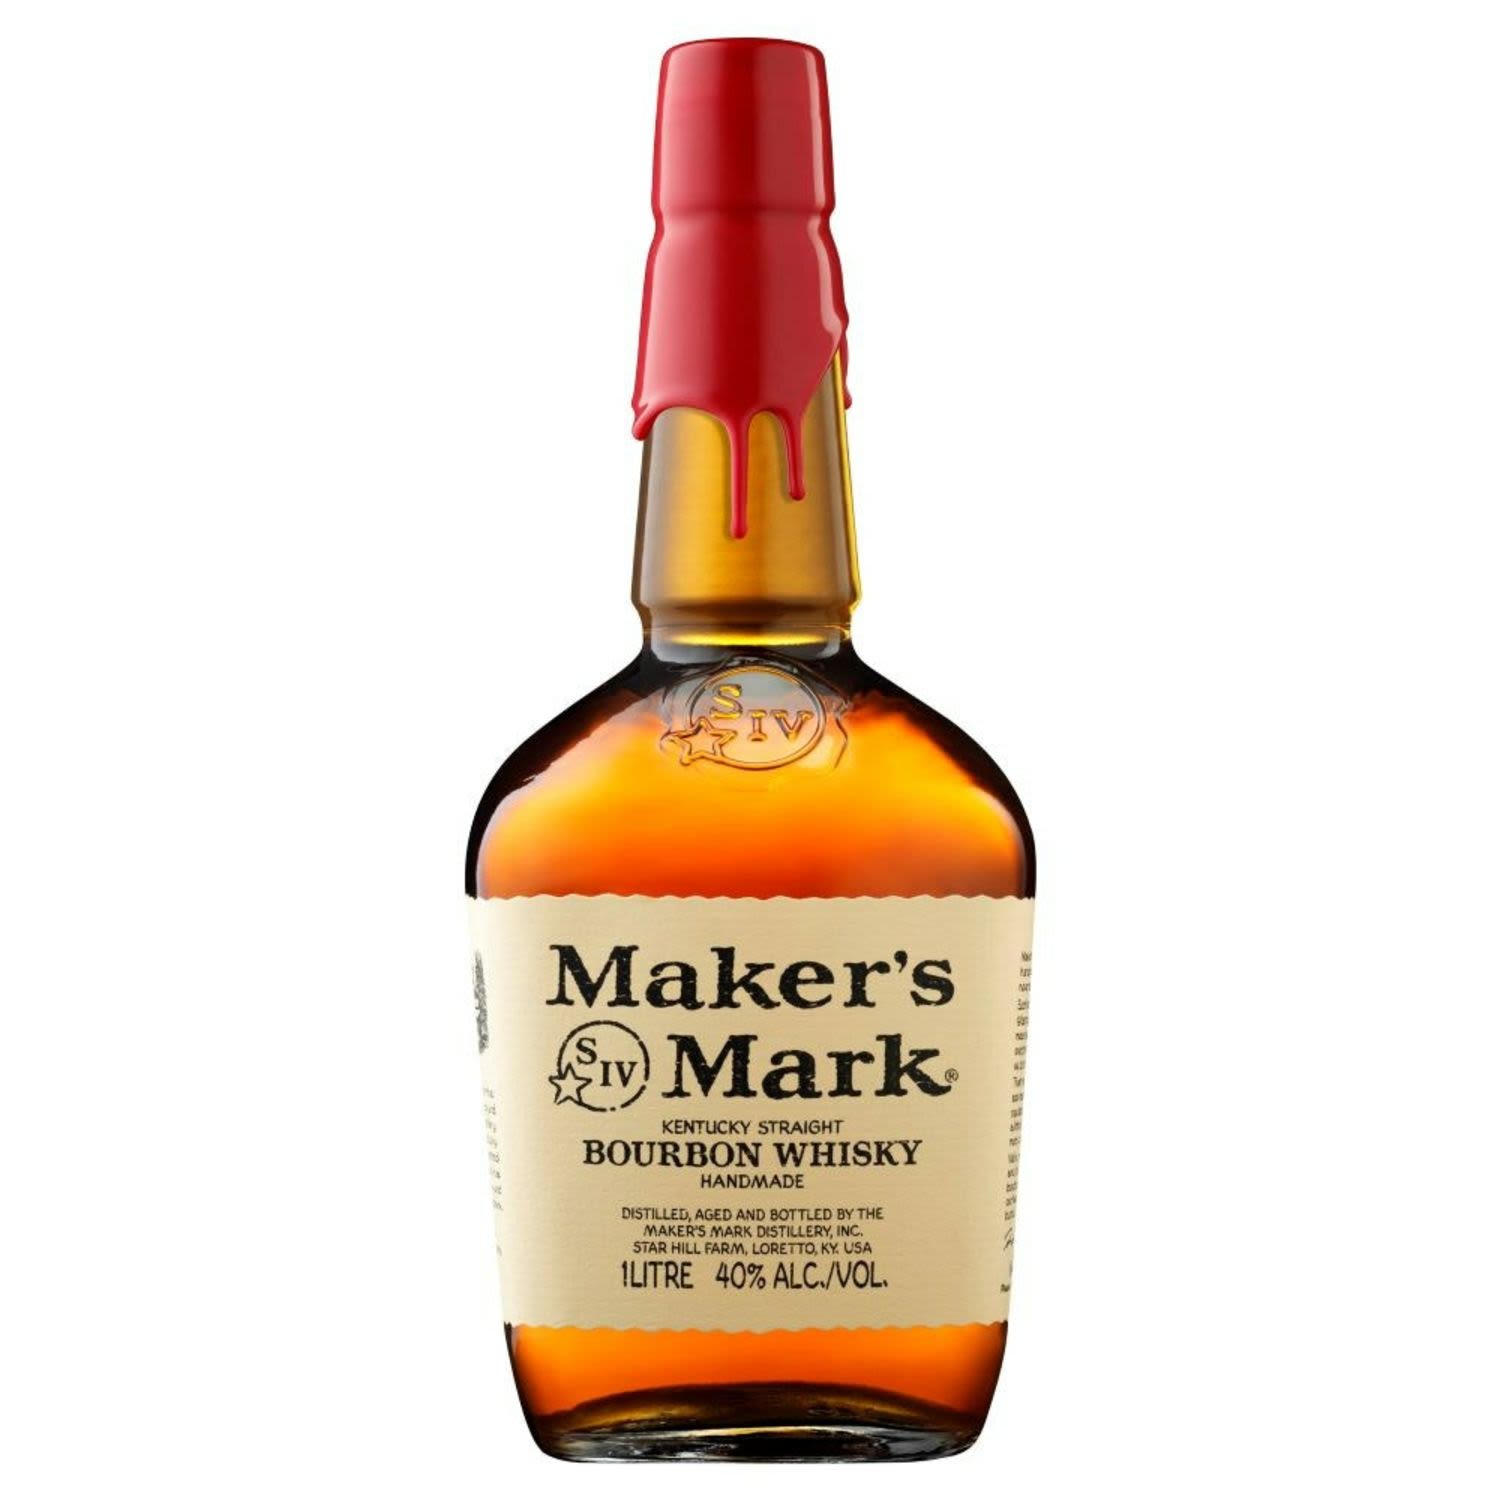 Maker's Mark is a unique and full-flavoured, hand-made Bourbon, made using the old-style sour-mash method and sealed with the iconic red wax. It is smooth and approachable with an easy finish – a true contrast to hot, harsh whiskies that "blow your ears off," and a downright revolutionary idea at the time. <br /> <br />Alcohol Volume: 40.00%<br /><br />Pack Format: Bottle<br /><br />Standard Drinks: 31.6<br /><br />Pack Type: Bottle<br /><br />Country of Origin: USA<br />